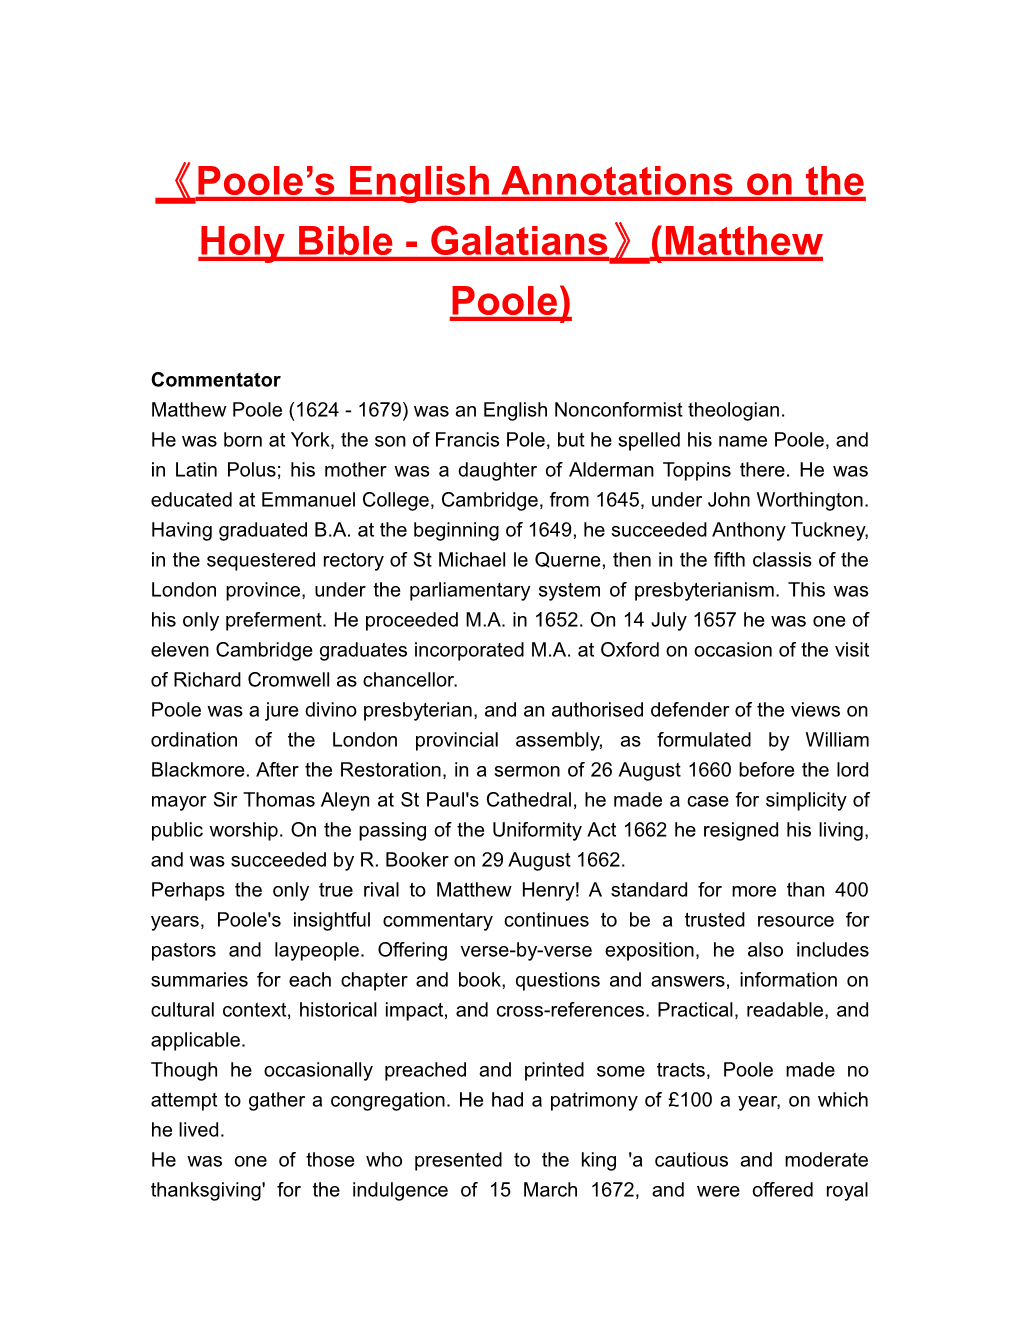 Poole S English Annotations on the Holy Bible - Galatians (Matthew Poole)